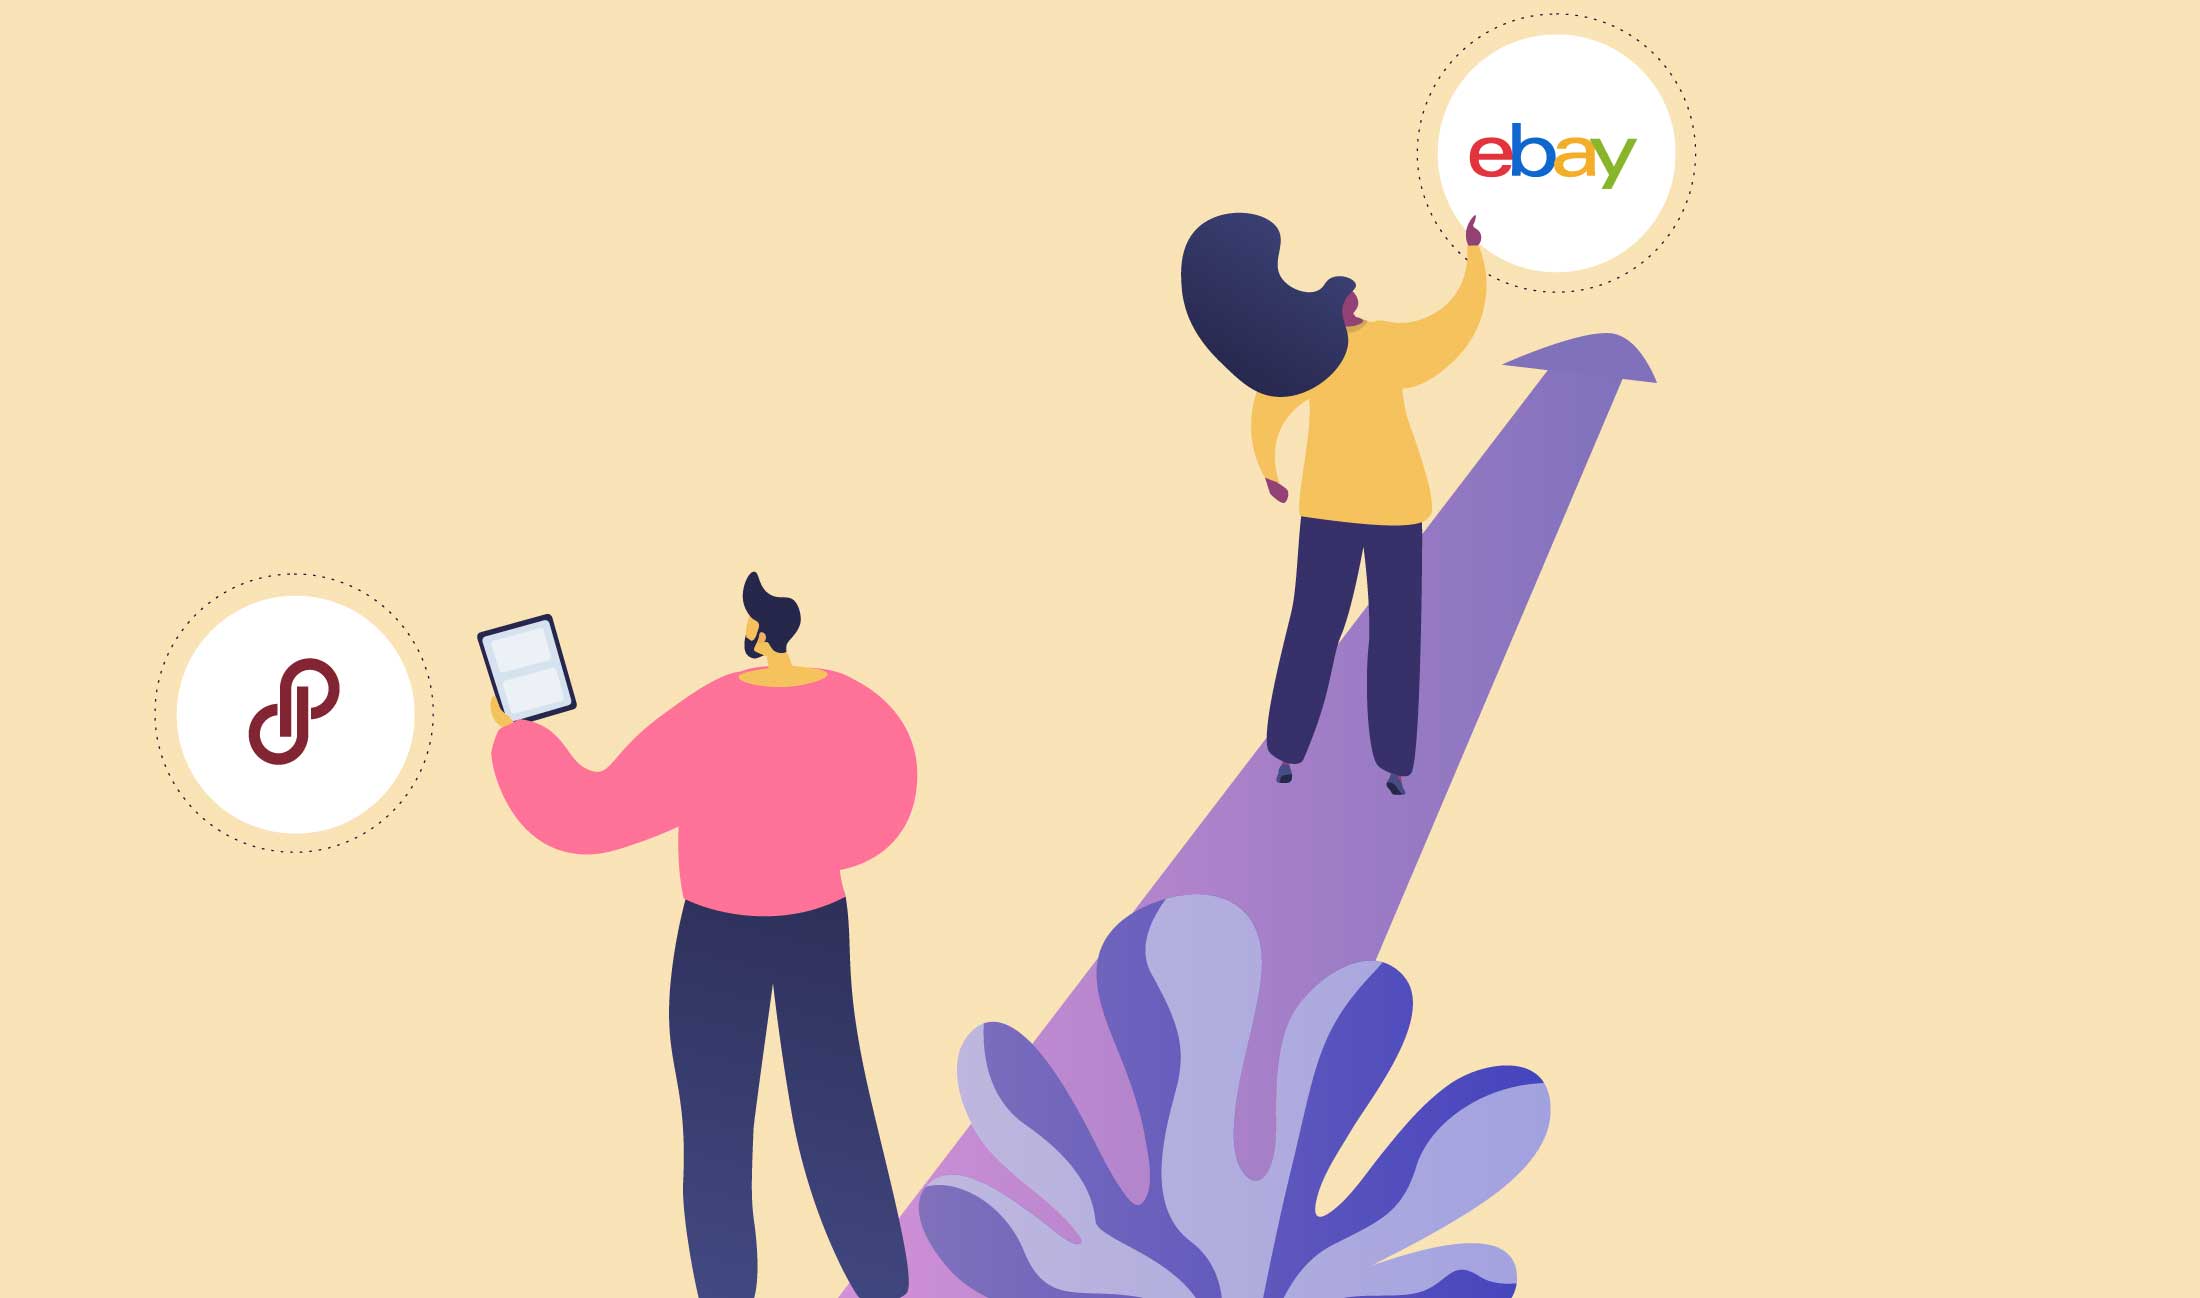 6 Things You Need To Know About Crosslisting From Poshmark To eBay